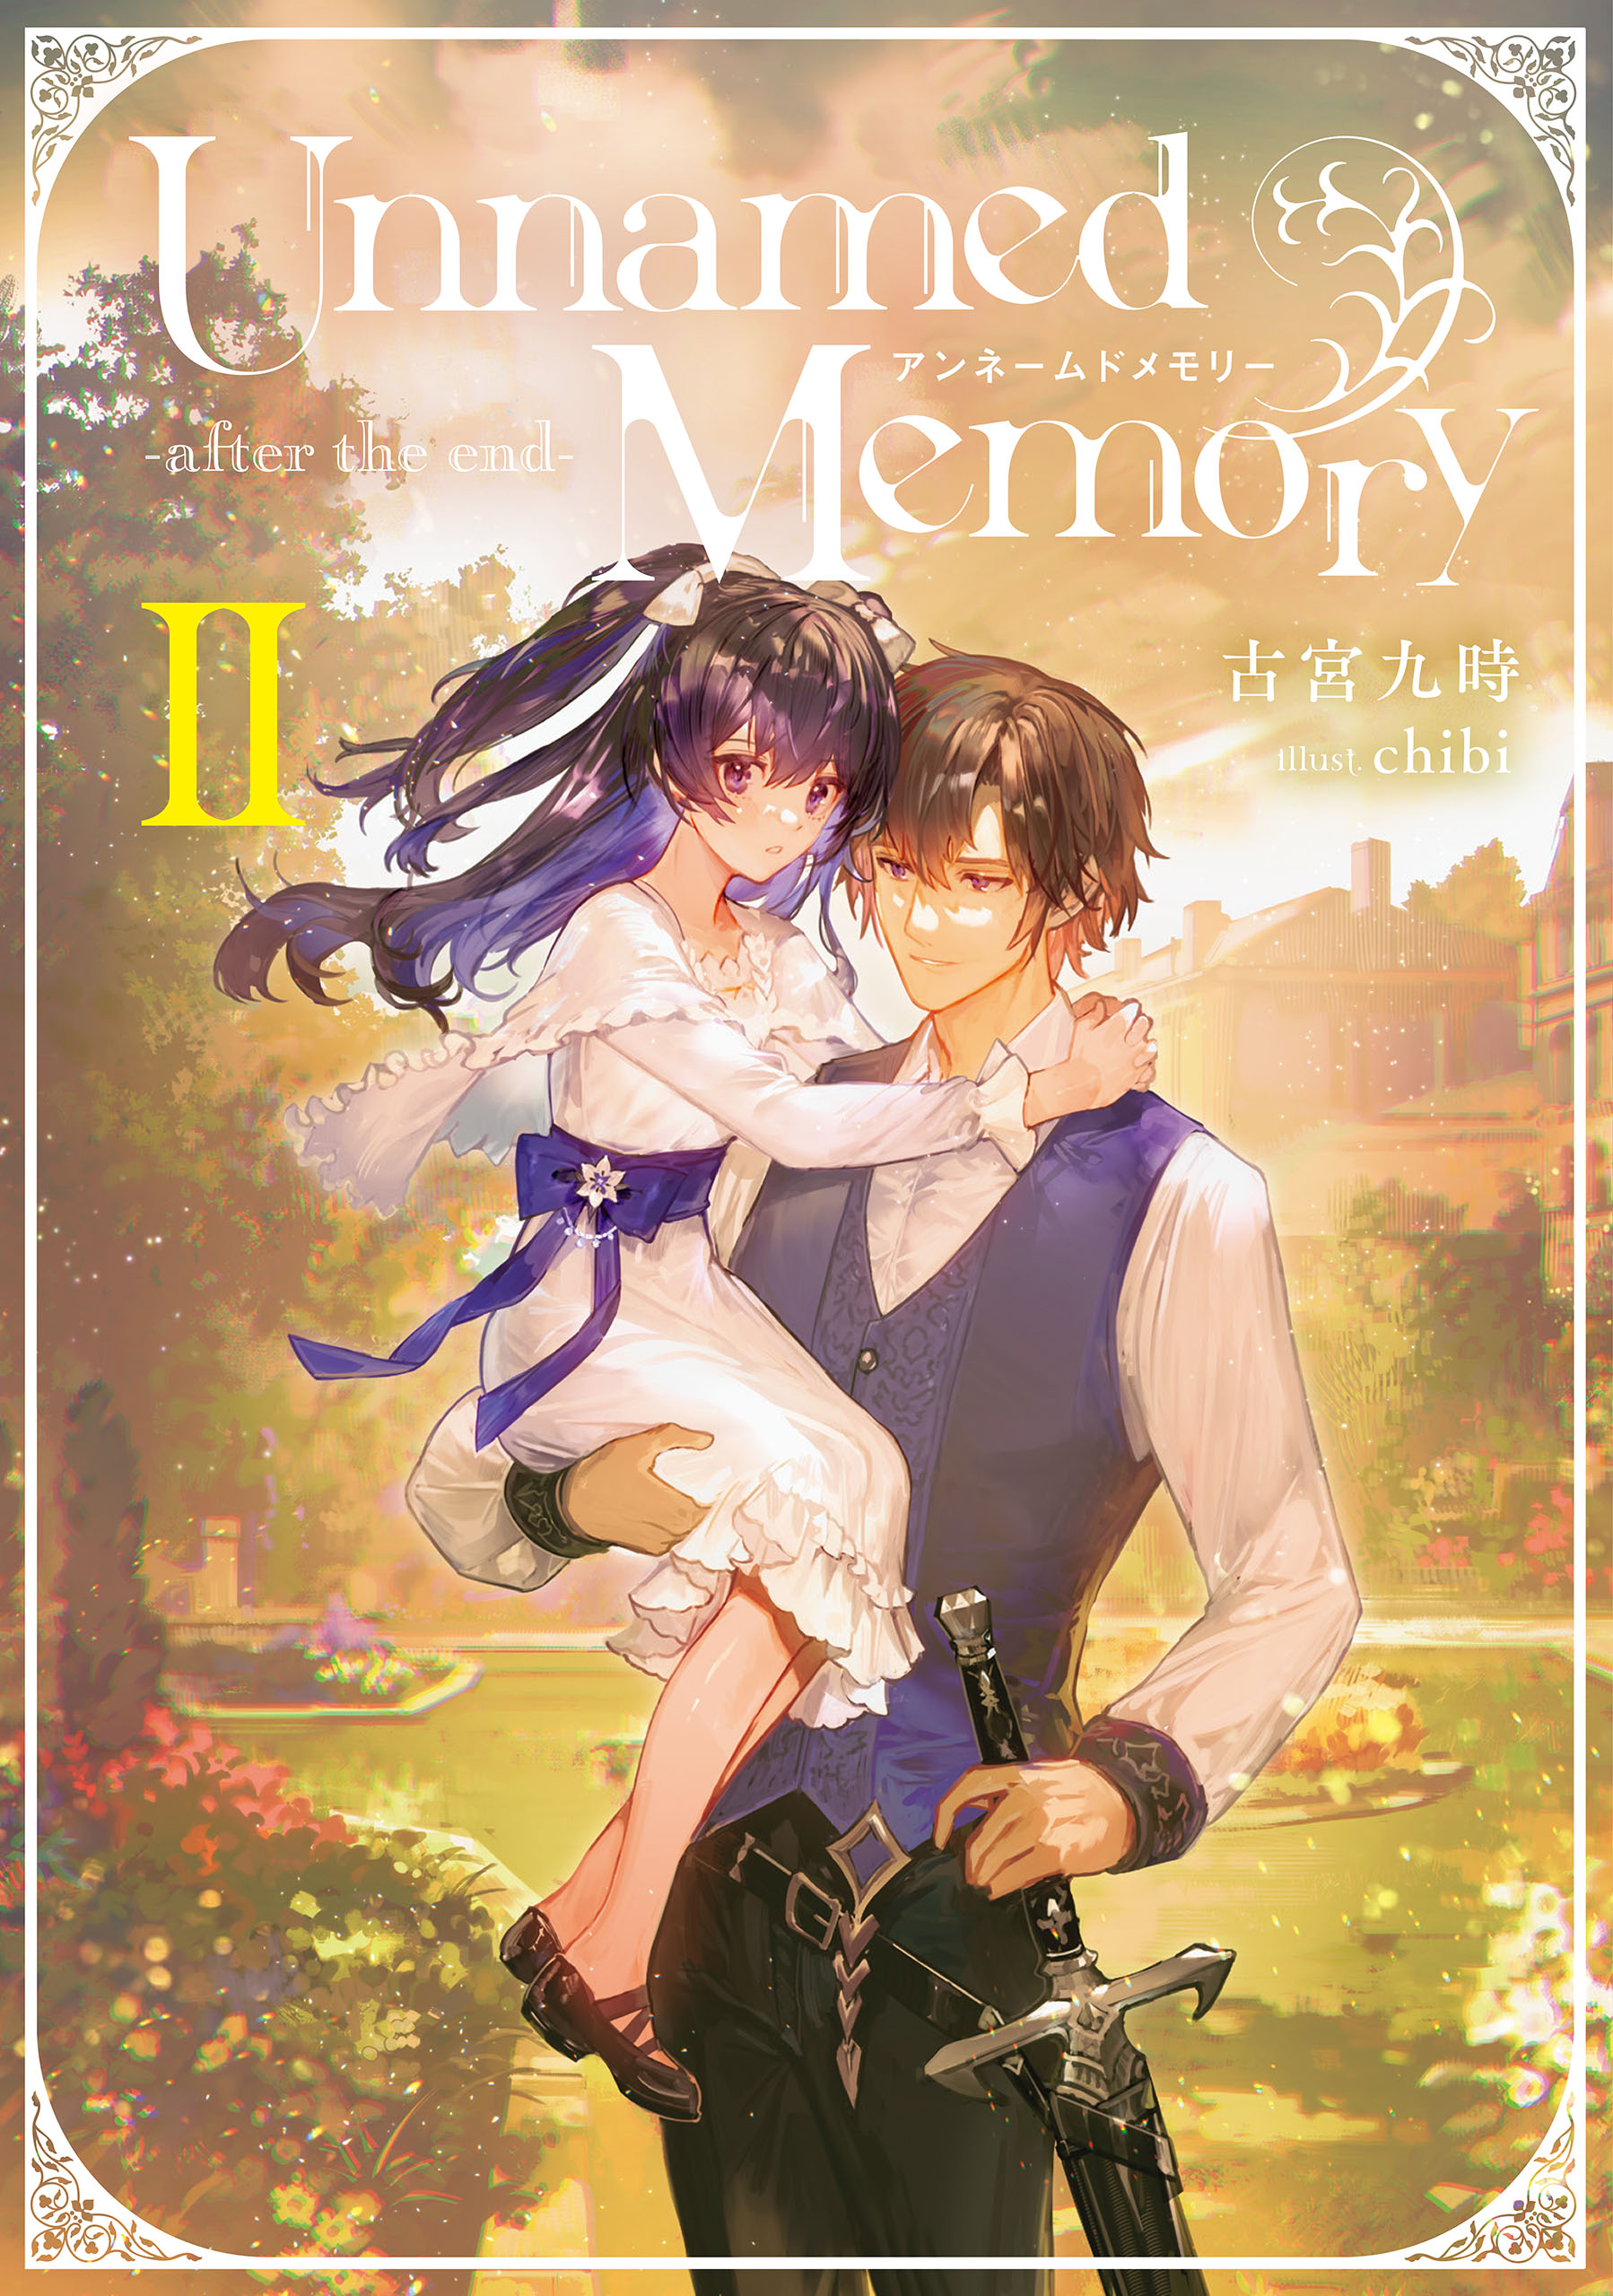 Unnamed Memory -after the end-II - 古宮九時/chibi - 漫画・ラノベ 